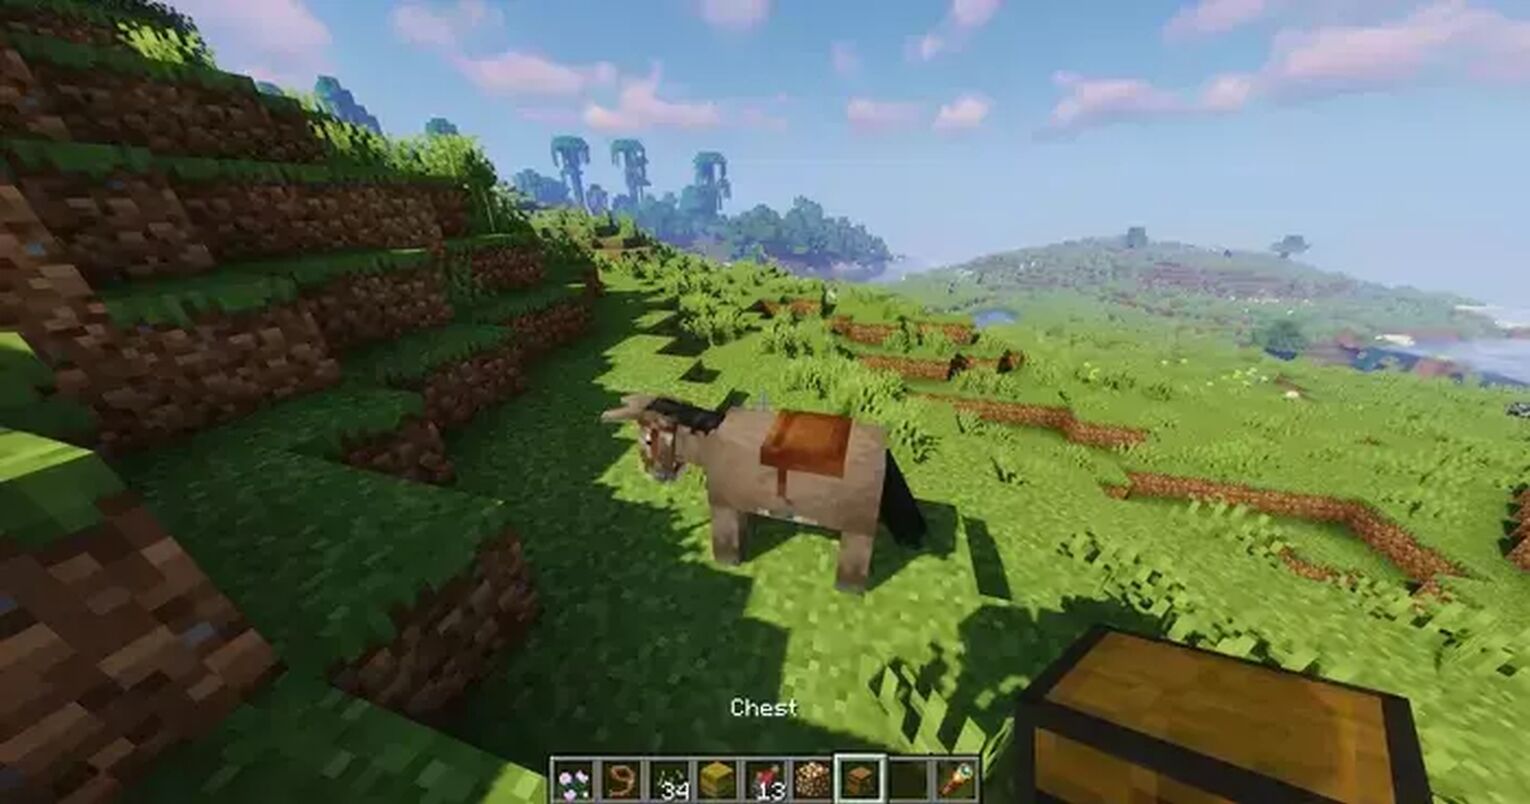 How to Equip Chests on a Minecraft Donkey